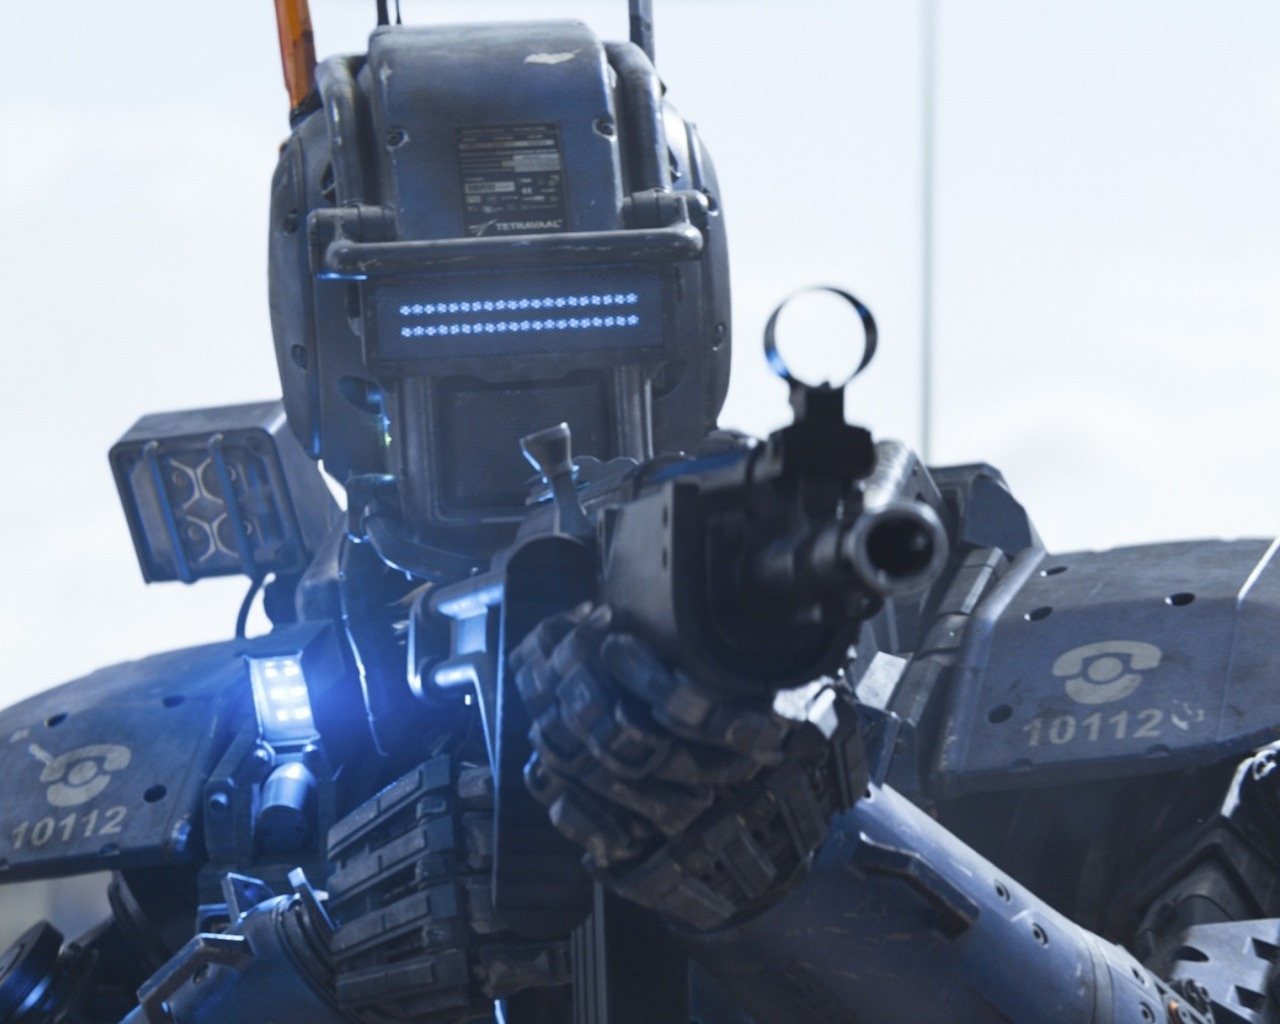 Chappie for 1280 x 1024 resolution